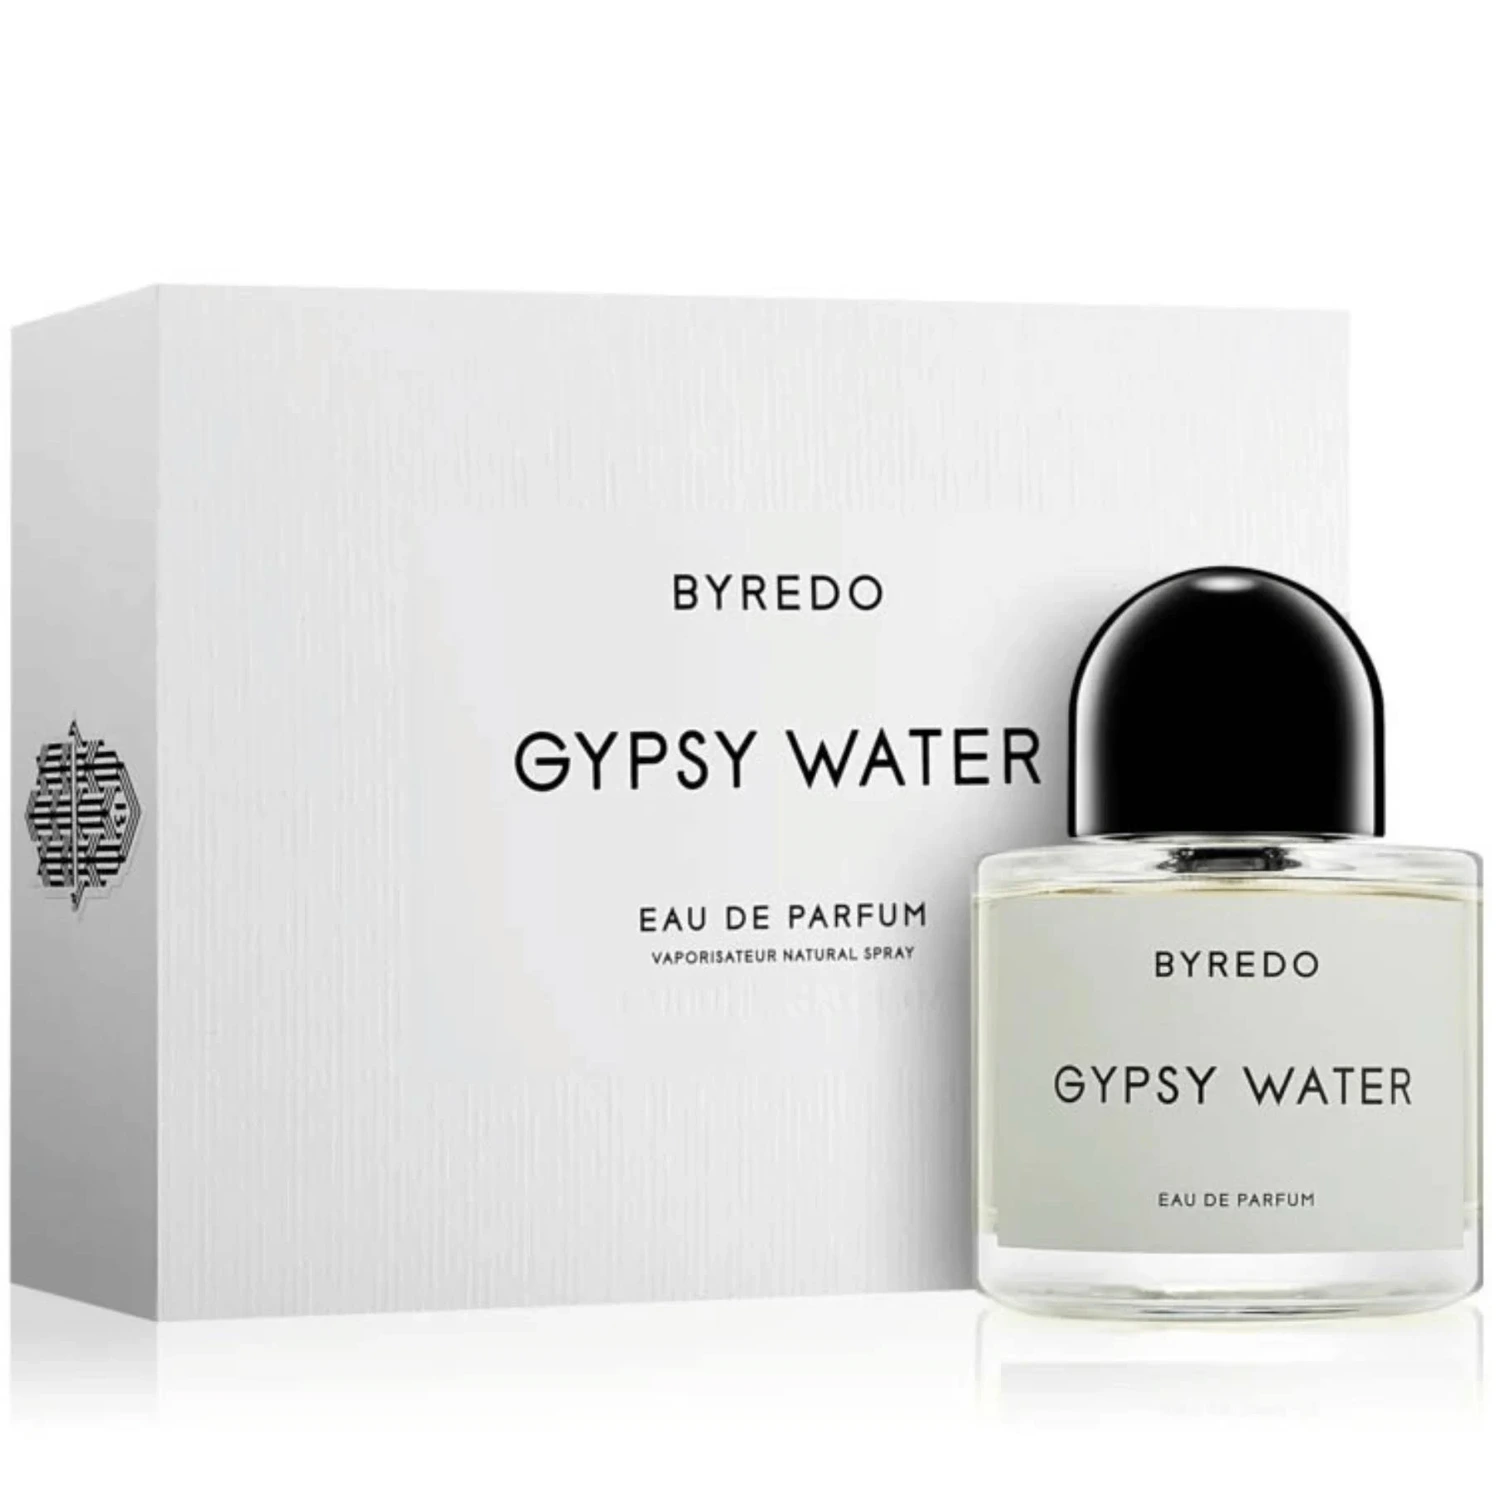 <p>Experience the alluring charm of the nomadic lifestyle with Byredo's Gypsy Water 3.4 oz EDP. This unisex scent embodies the freedom and vibrancy of the Romani culture, with notes of pine, sandalwood, amber, and citrus. Let it transport you to a dreamy, enchanted forest where anything is possible.</p>